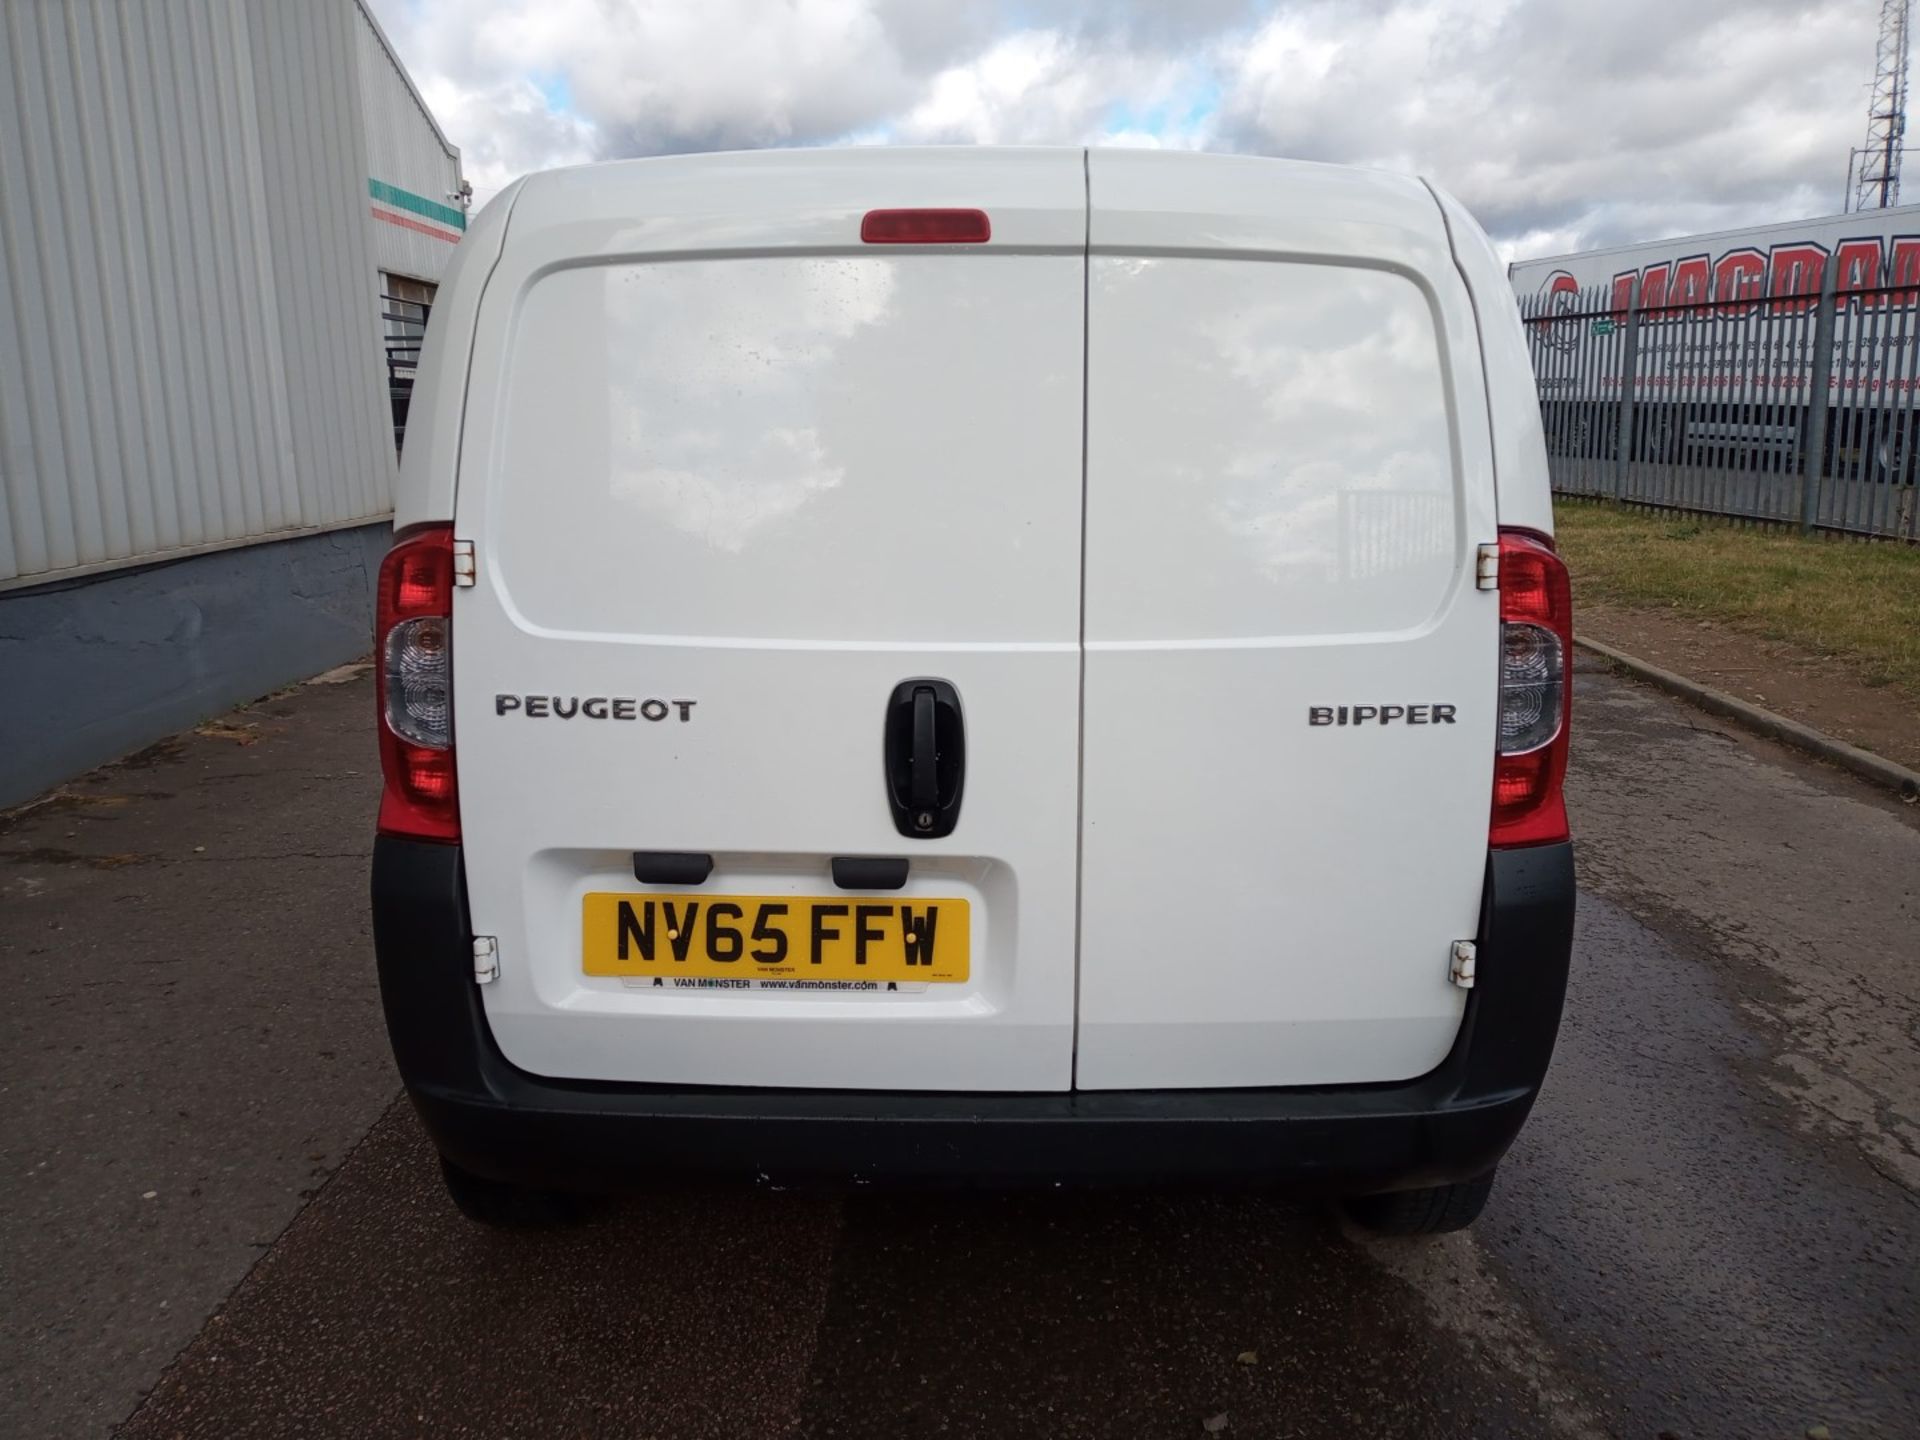 2015 Peugeot Bipper S Hdi White Panel - CL505 - Ref: VVS031 - Location: Corby, Northamptonshire - Image 8 of 25